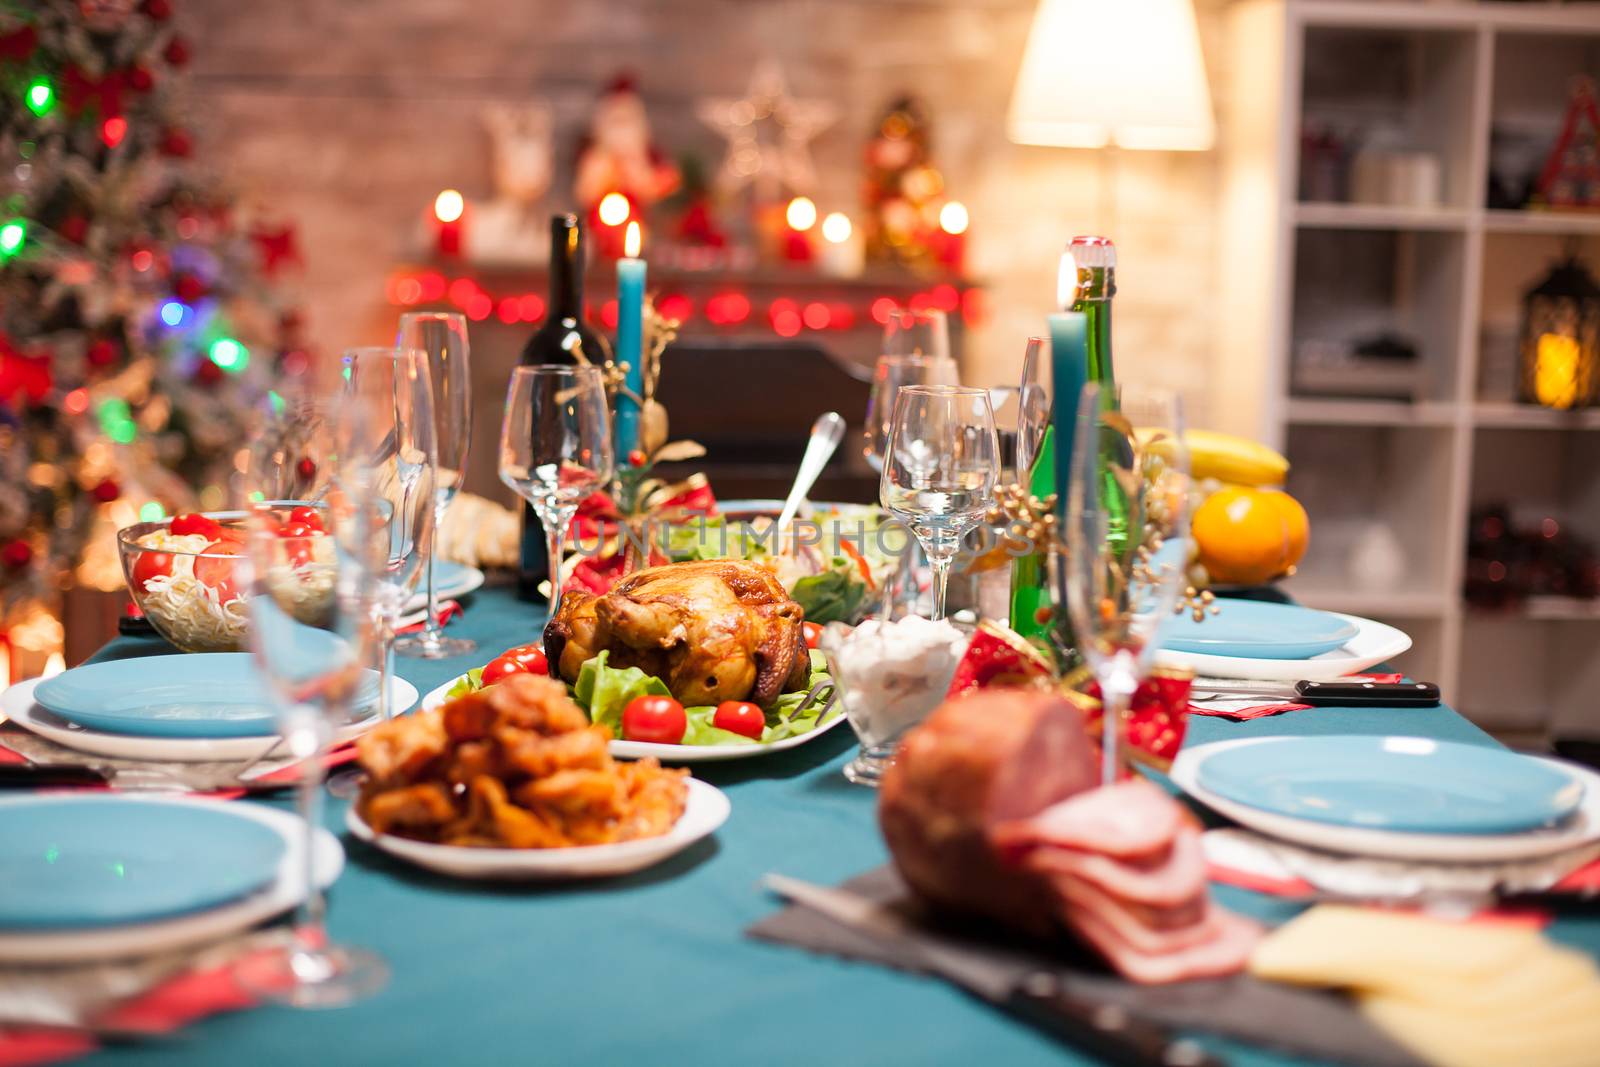 Christmas celebration with delicious food on the table.